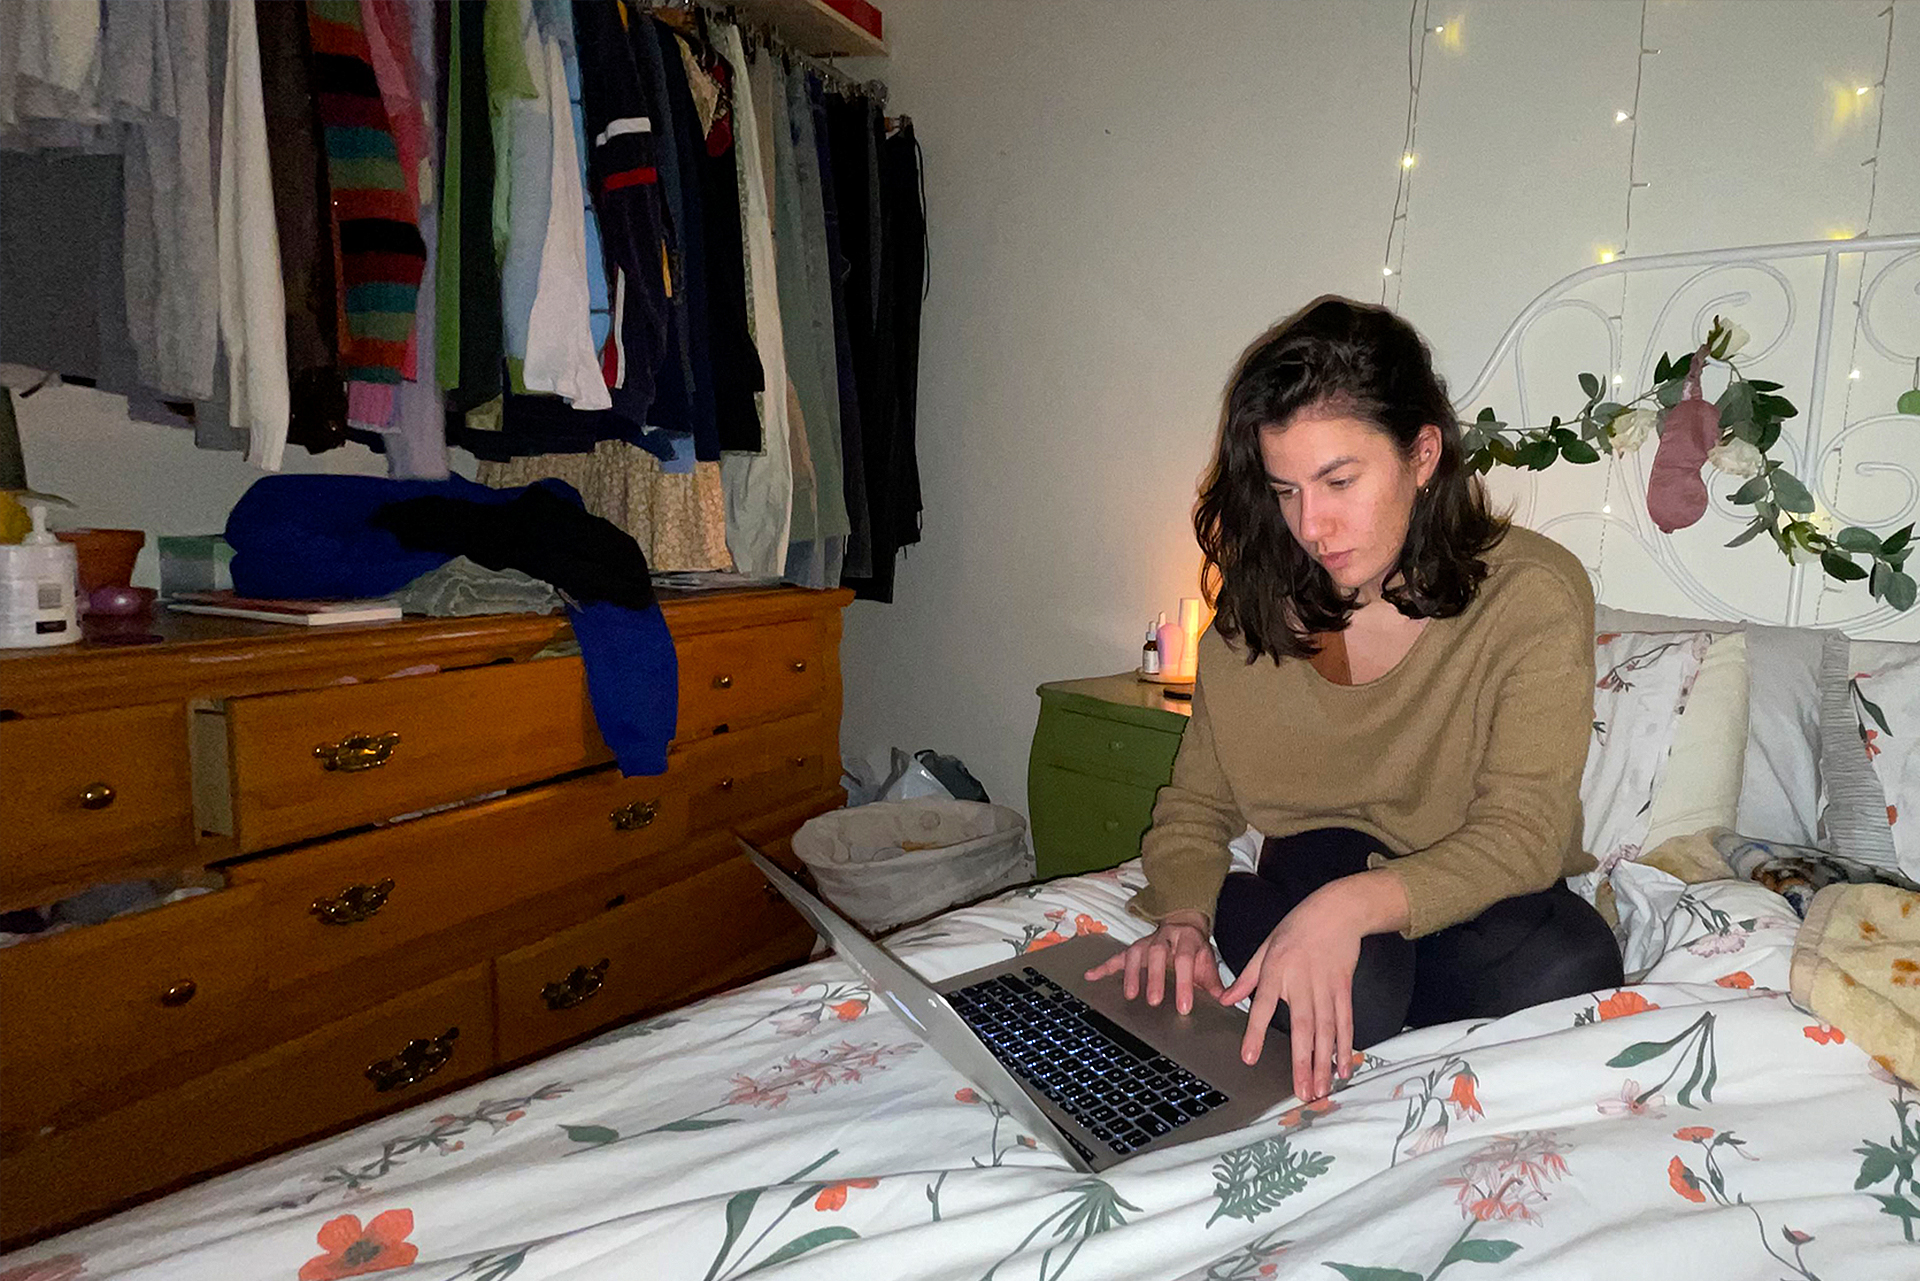 Women sitting on her bed while on the computer.